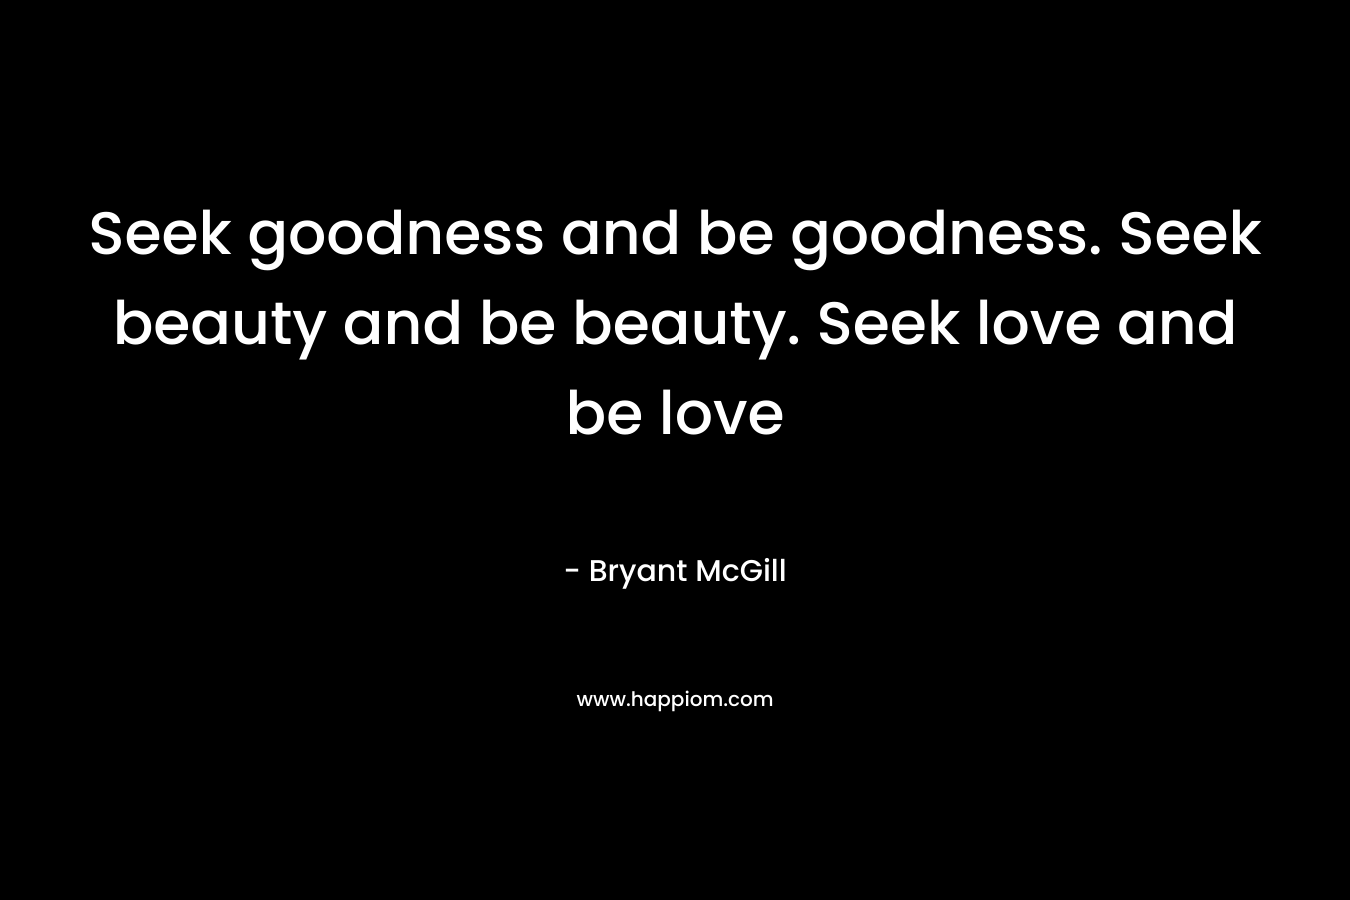 Seek goodness and be goodness. Seek beauty and be beauty. Seek love and be love